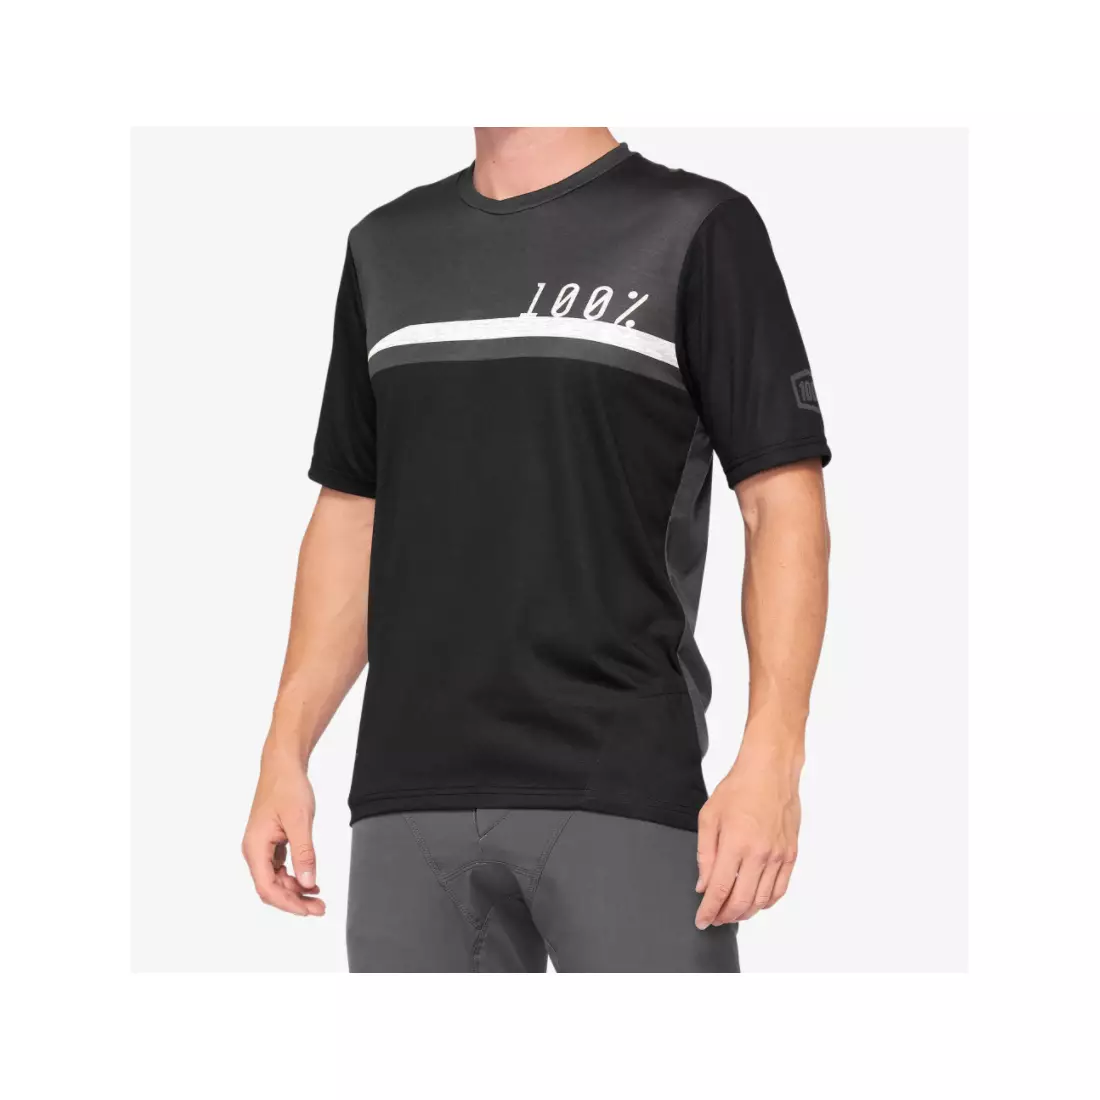 100% AIRMATIC men's cycling jersey, black charcoal 